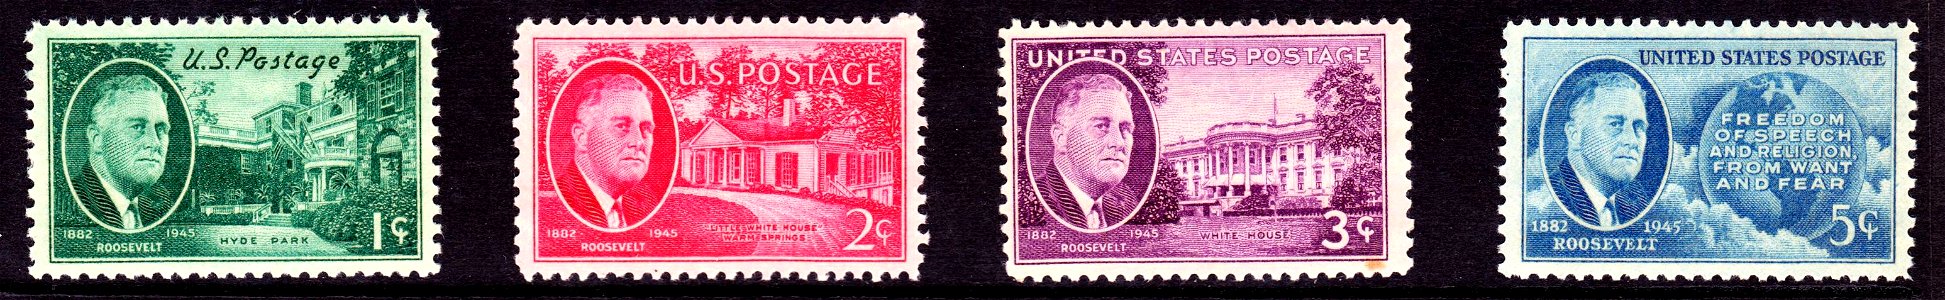 FDR Set4 1945 Issue